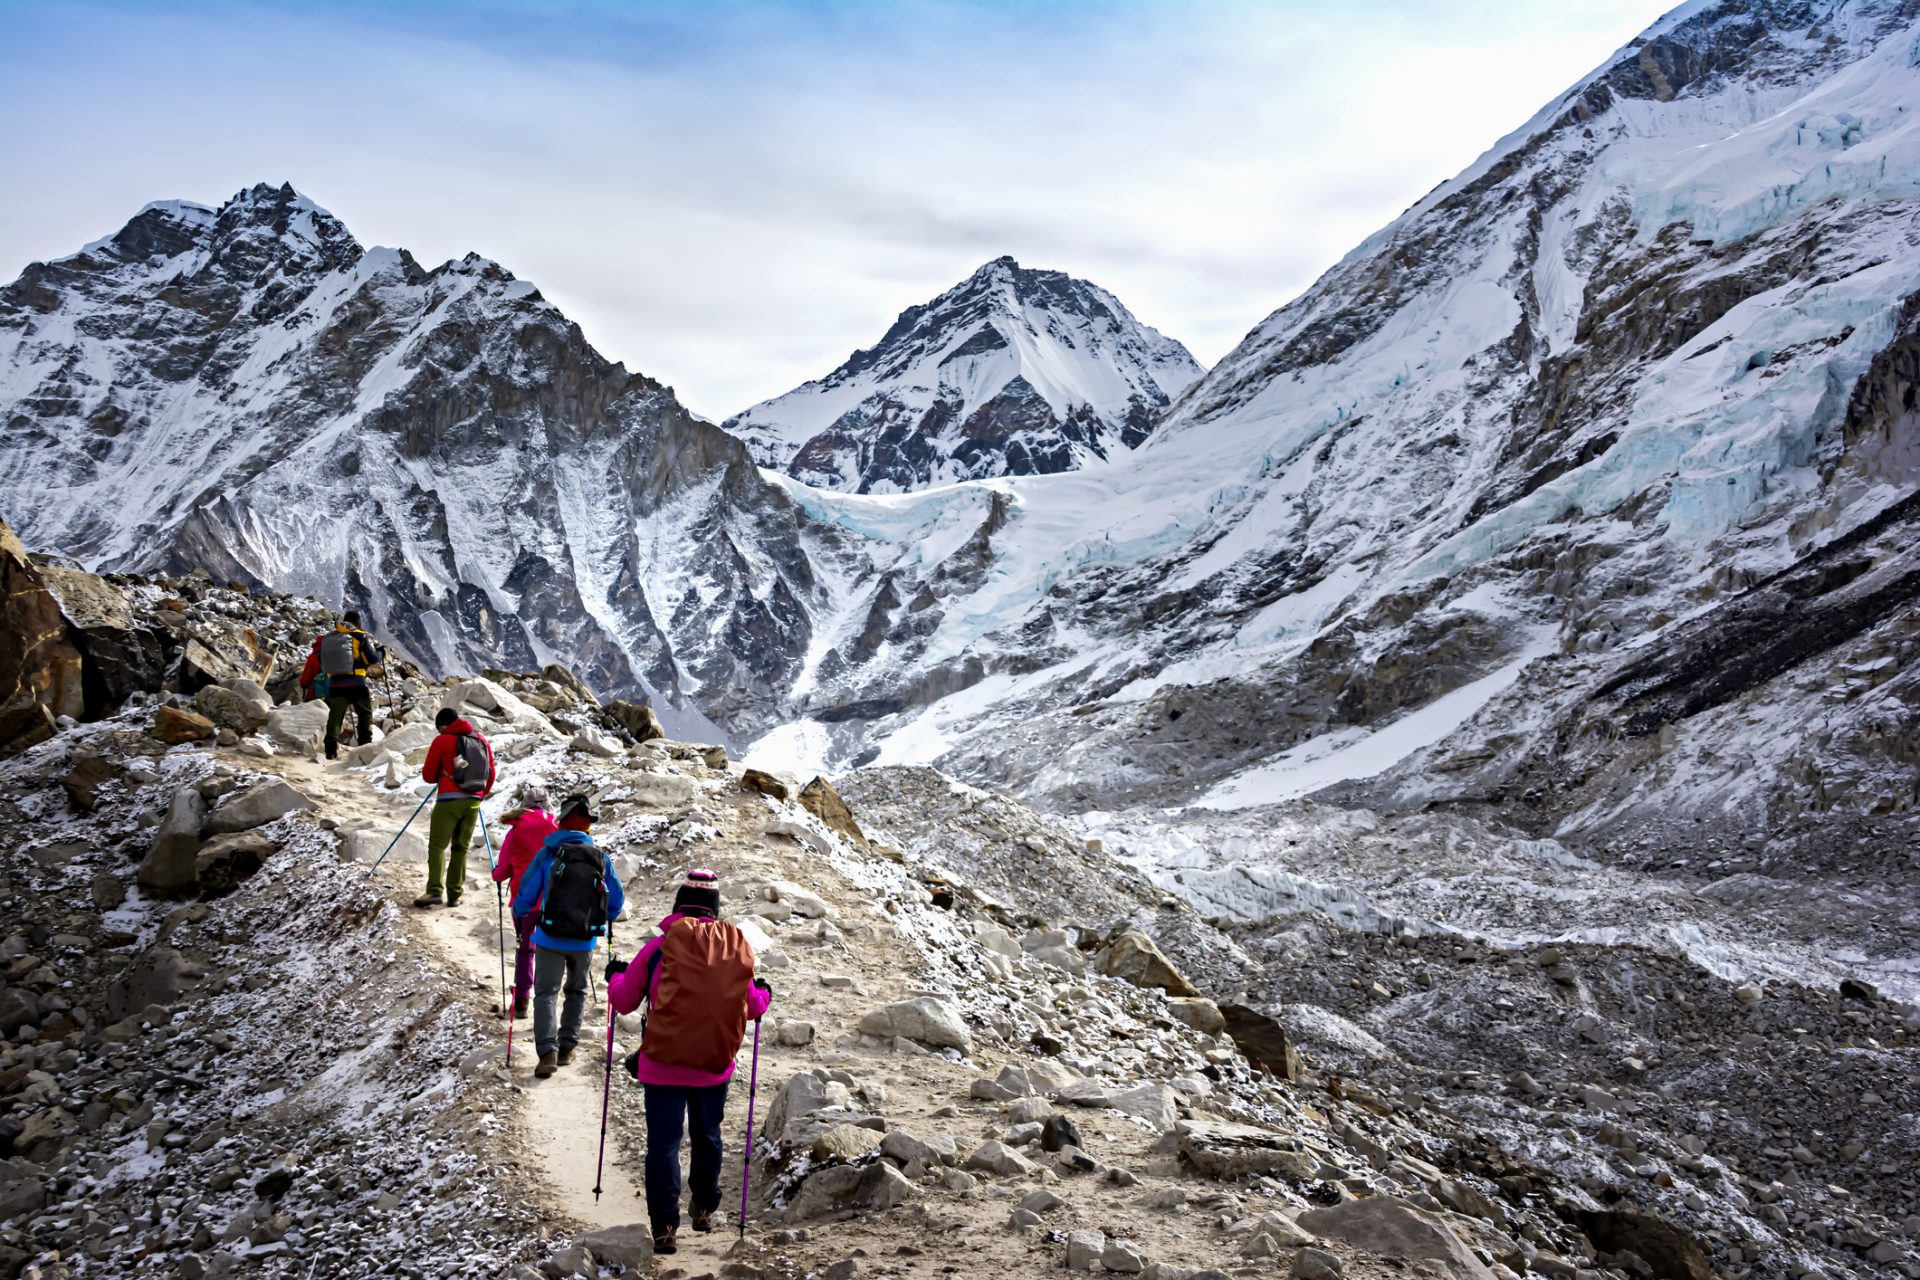 What do you need to know about climbing Mount Everest?